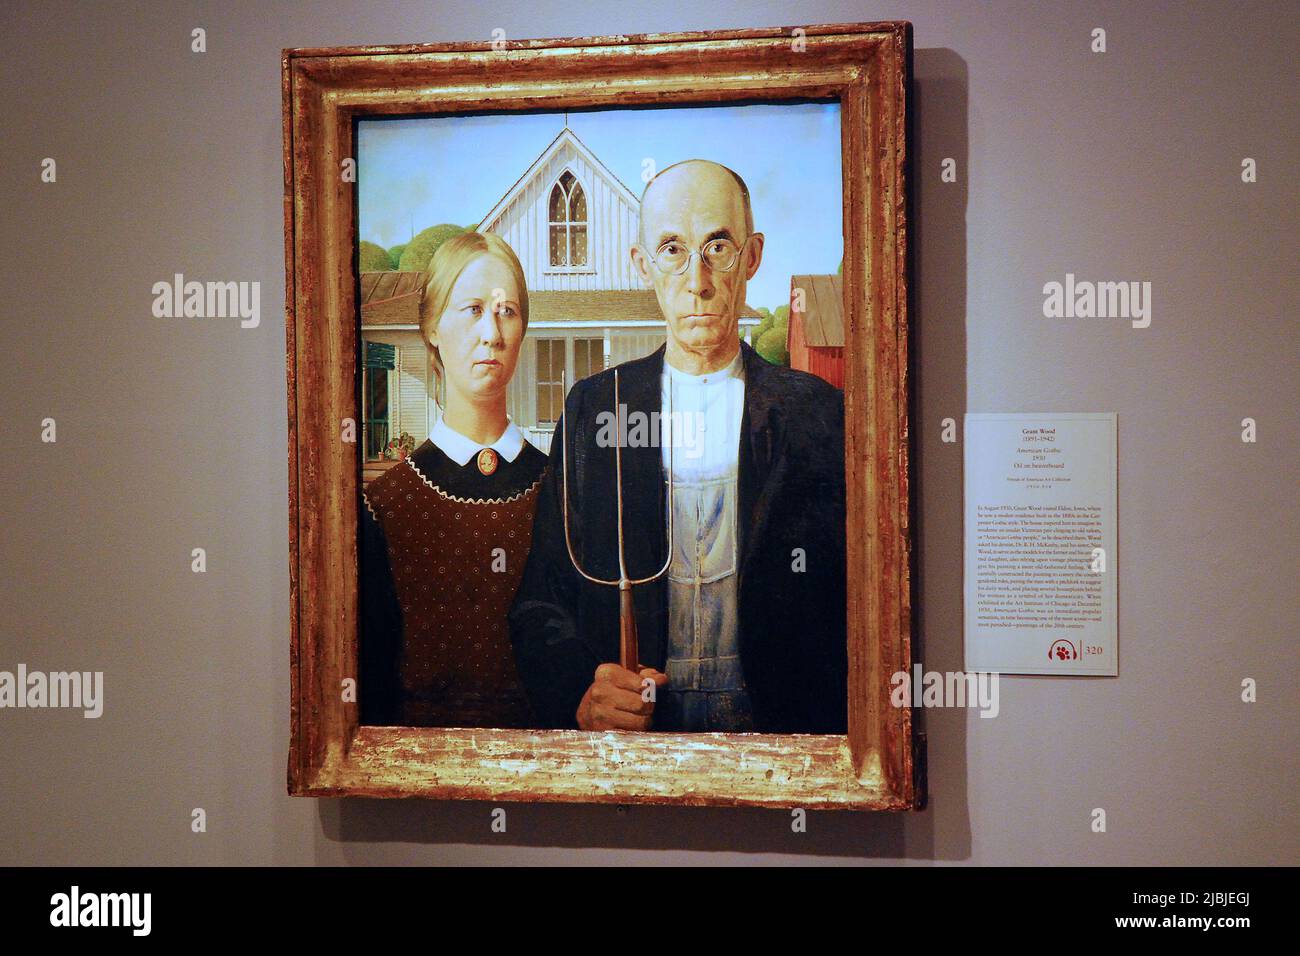 The classic painting, American Gothic, one of the most recognizable art works, hangs in the Chicago Art Institute Stock Photo